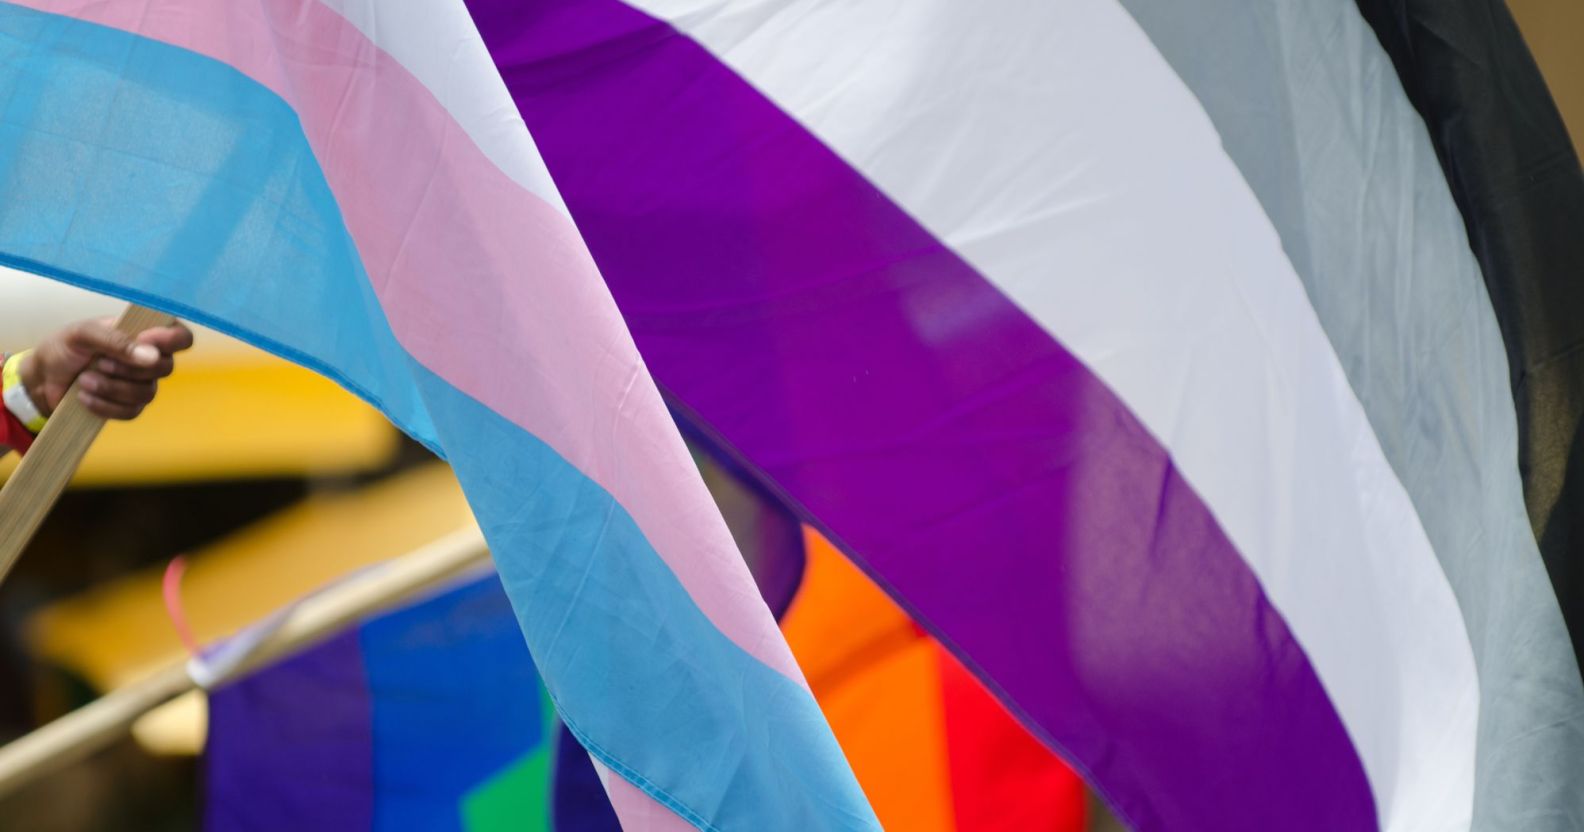 A trans and asexual flag waving together.